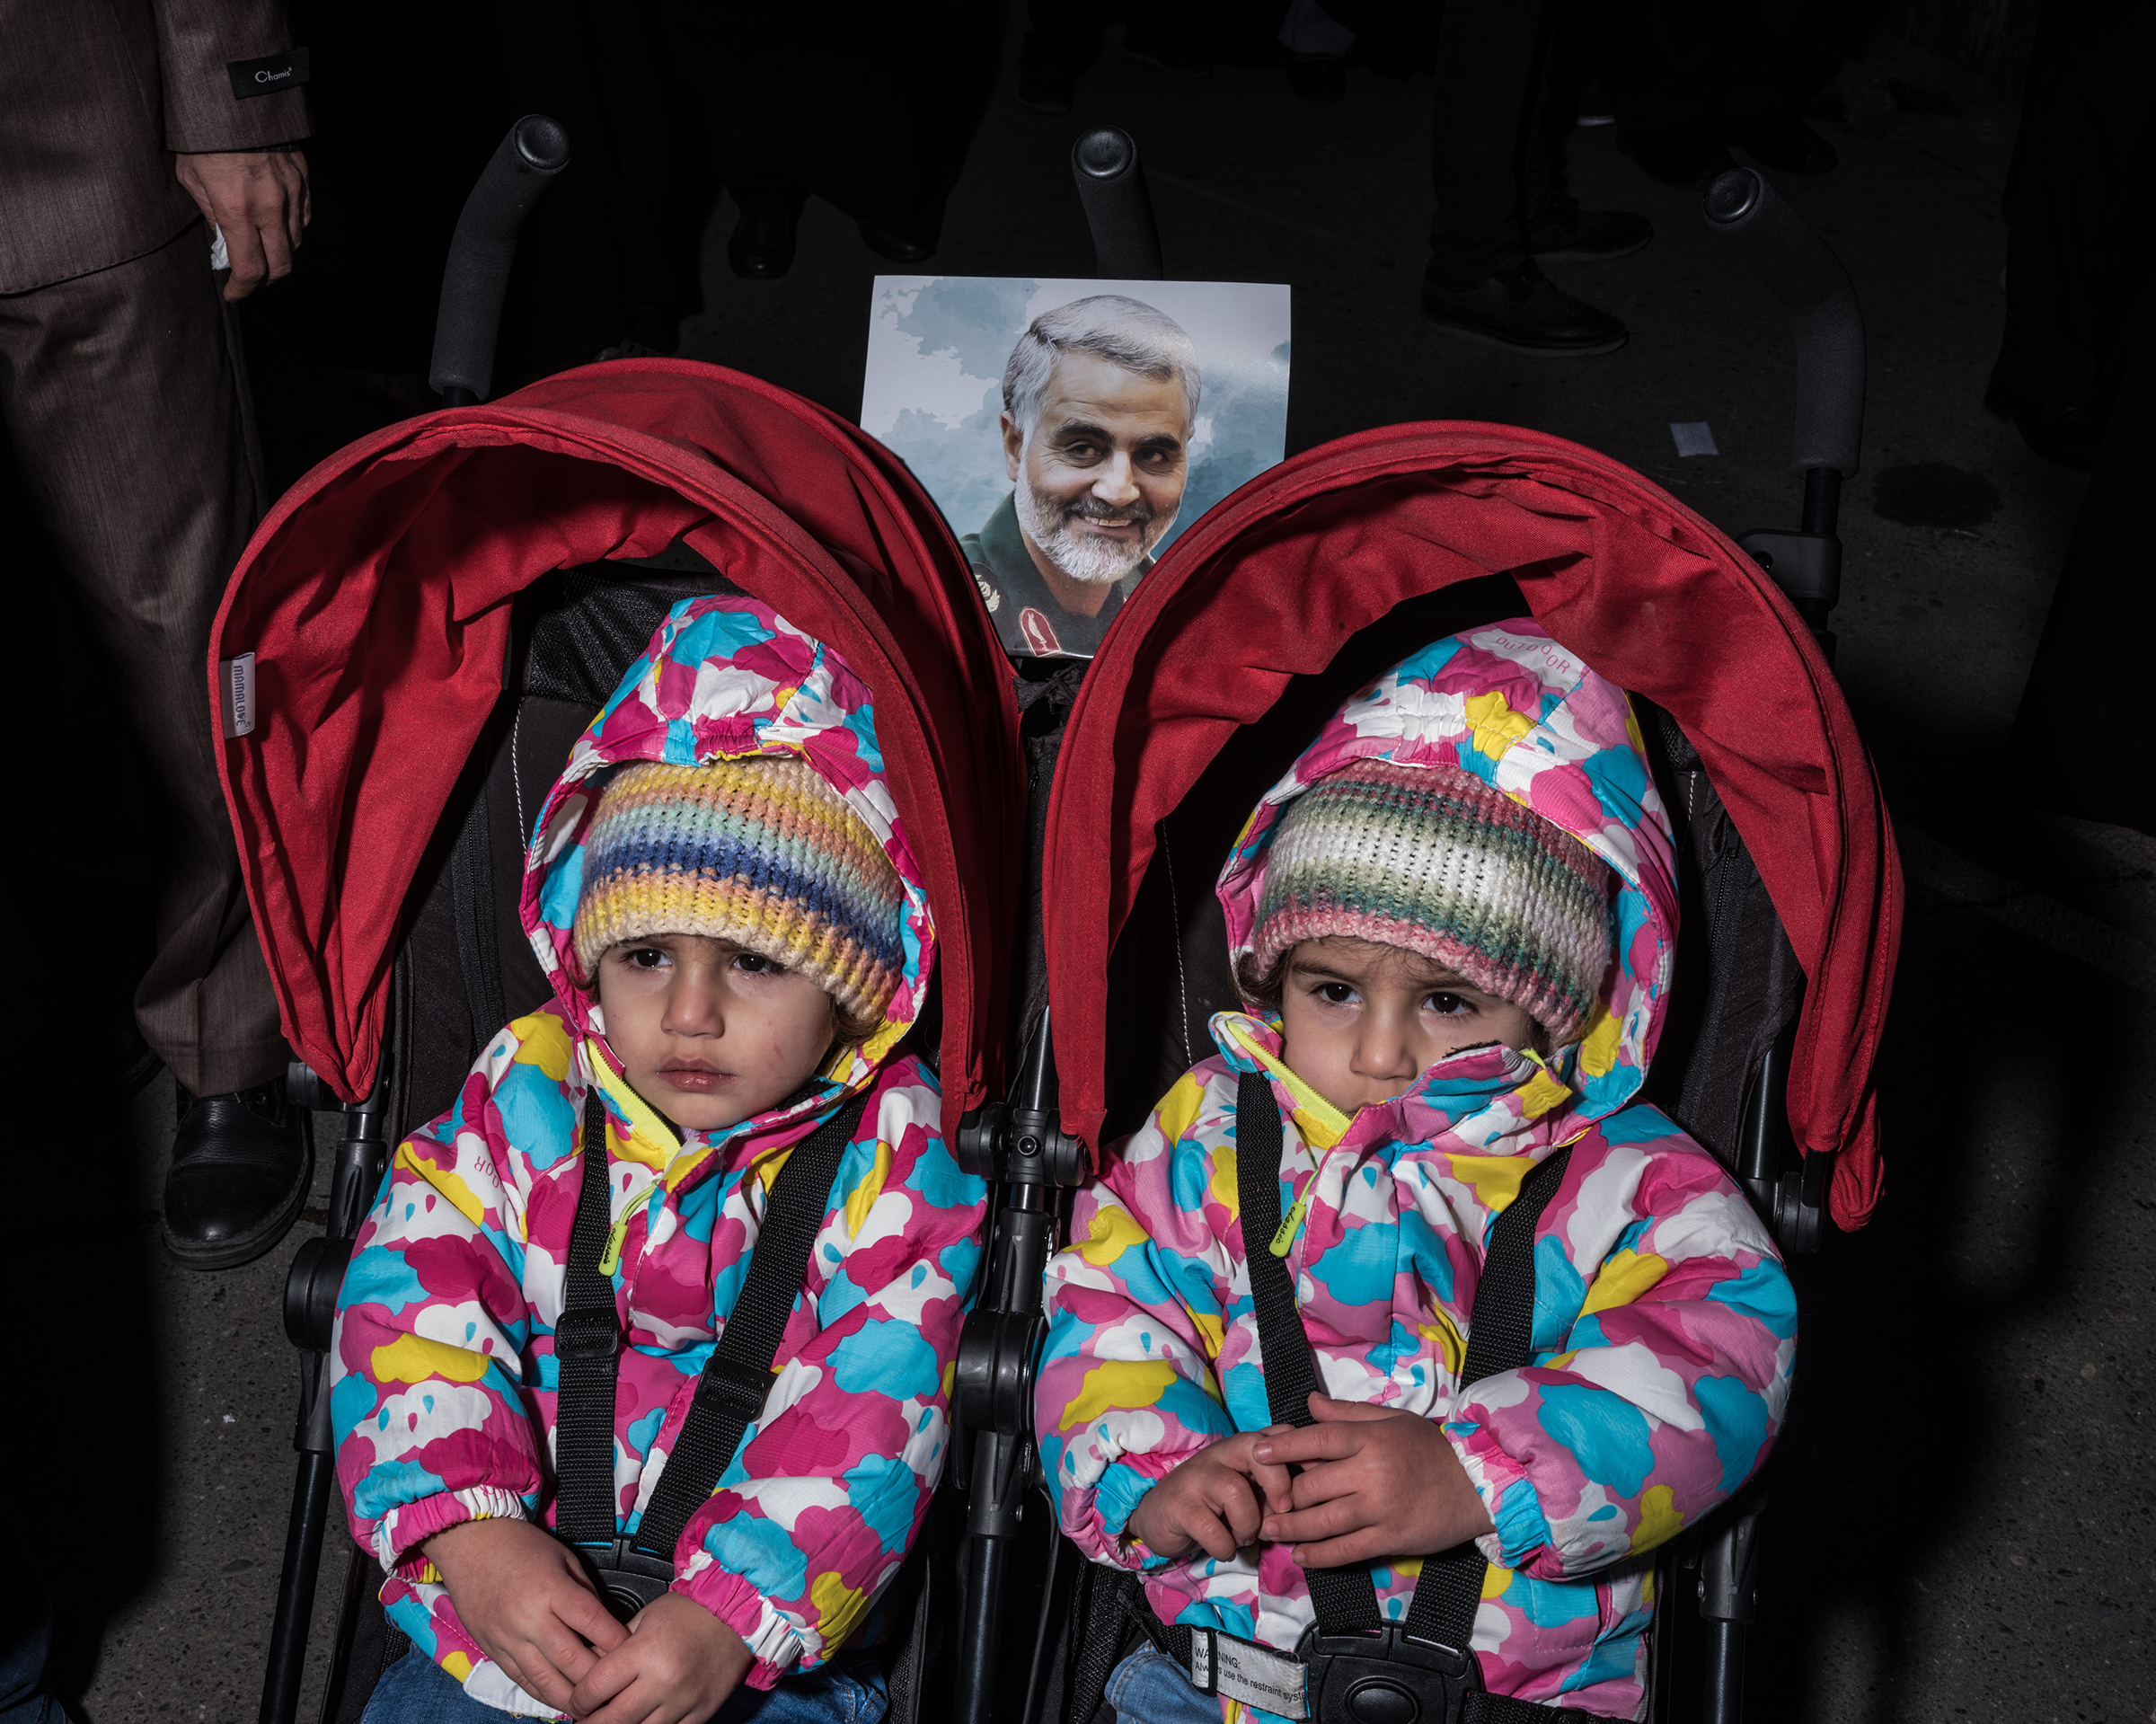 Two girls are <a href="https://time.com/longform/qasem-soleimani-tehran-iran-photos/" target="_blank" rel="noopener noreferrer">pushed in a double stroller</a> in a crowd of people in Tehran mourning the death of Qasem Soleimani. (Newsha Tavakolian—Magnum Photos for TIME)